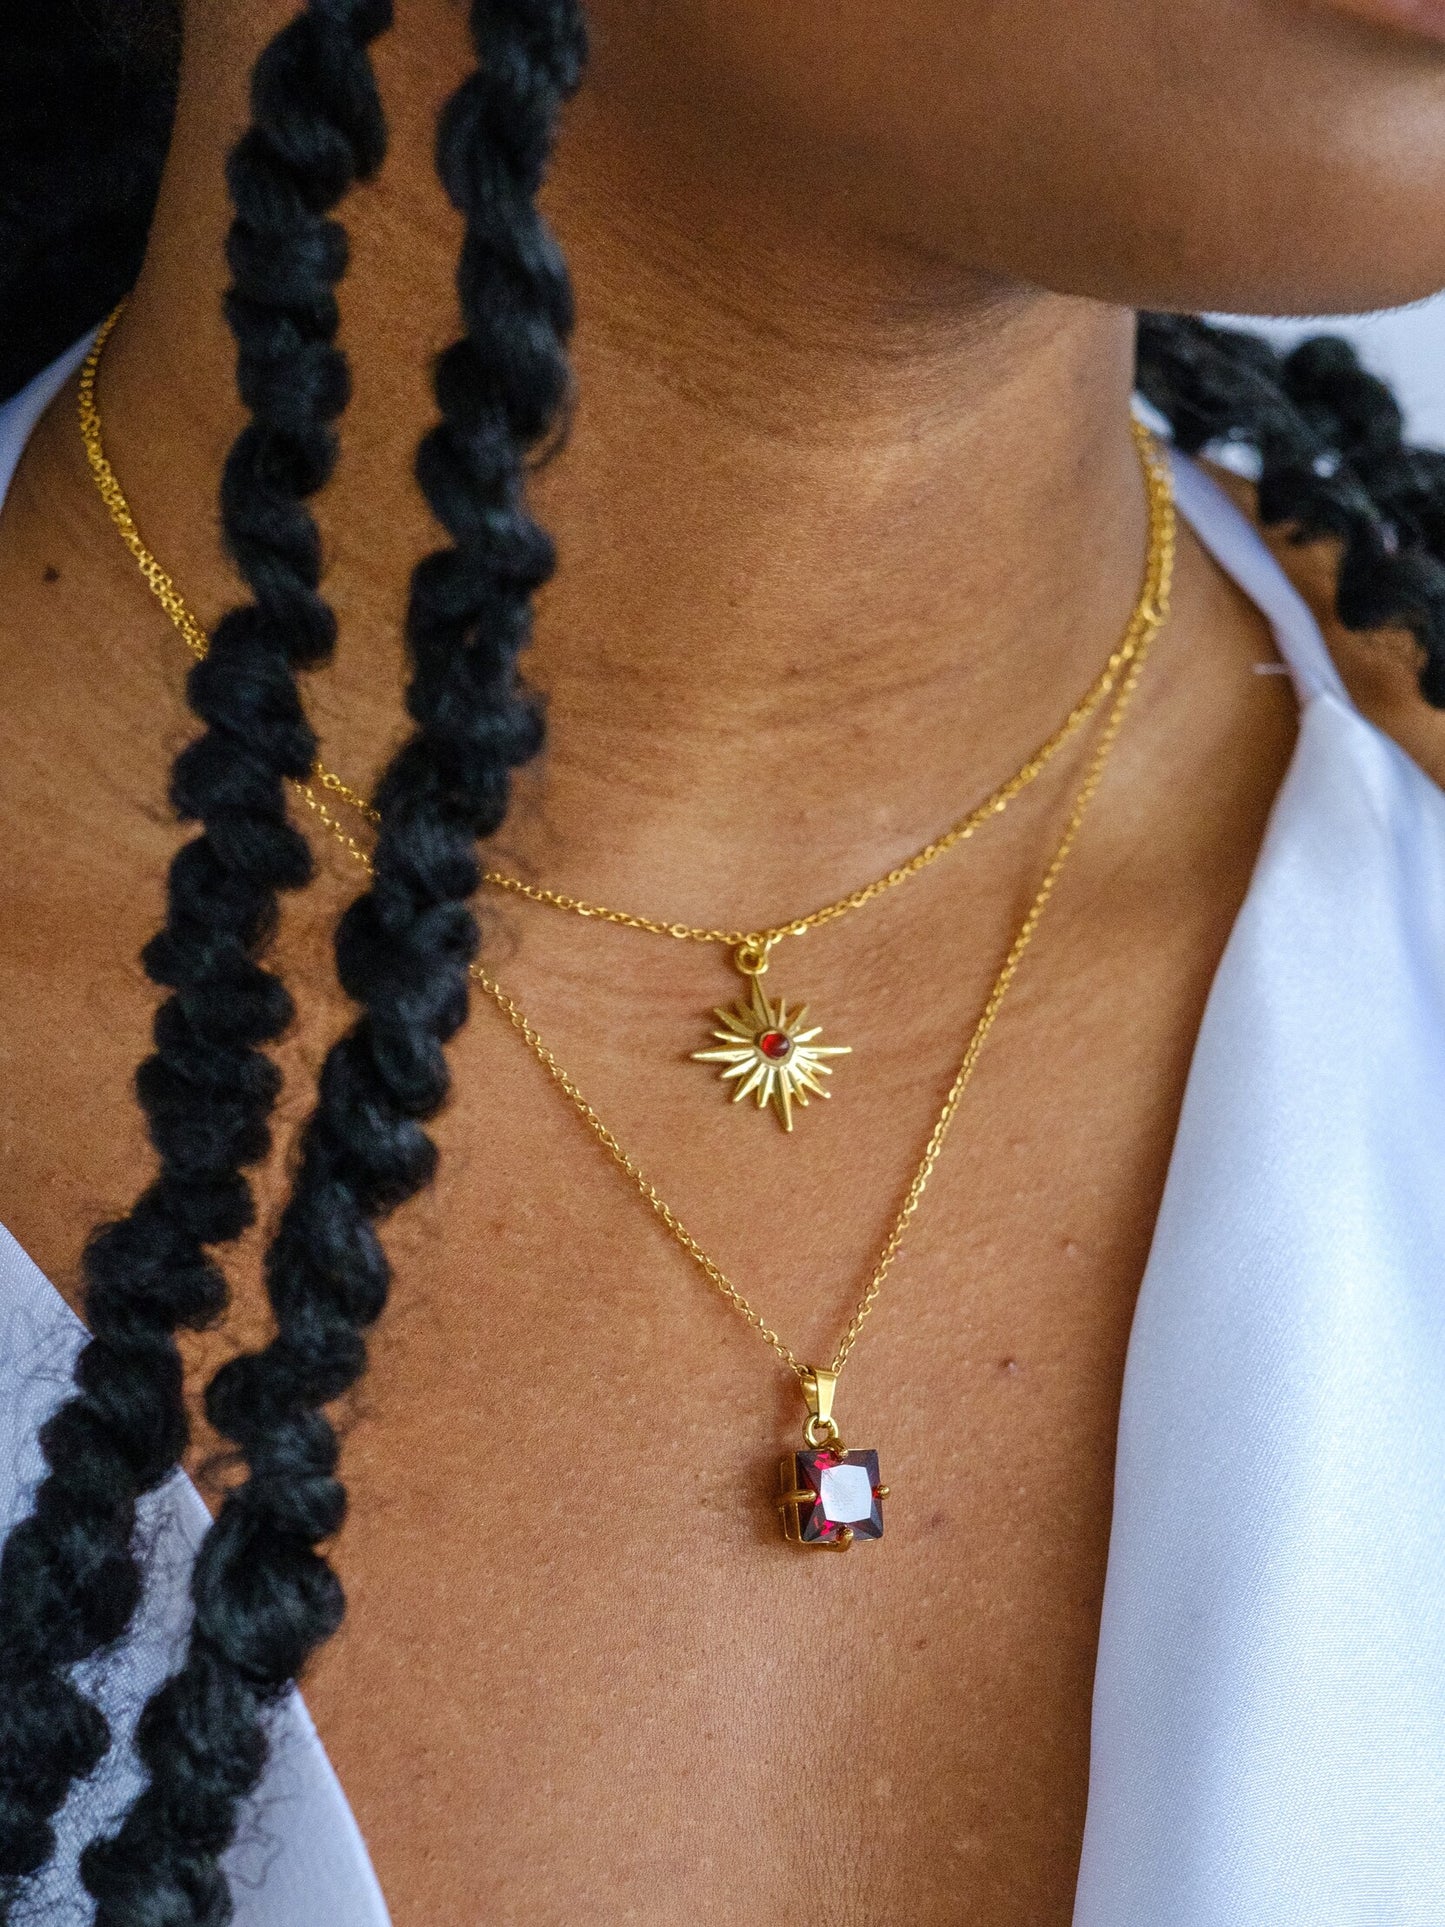 A woman wears two gold necklaces. The shorter necklace has a star shaped pendant with a small red gem in the centre. The longer necklace has a square shaped red crystal pendant